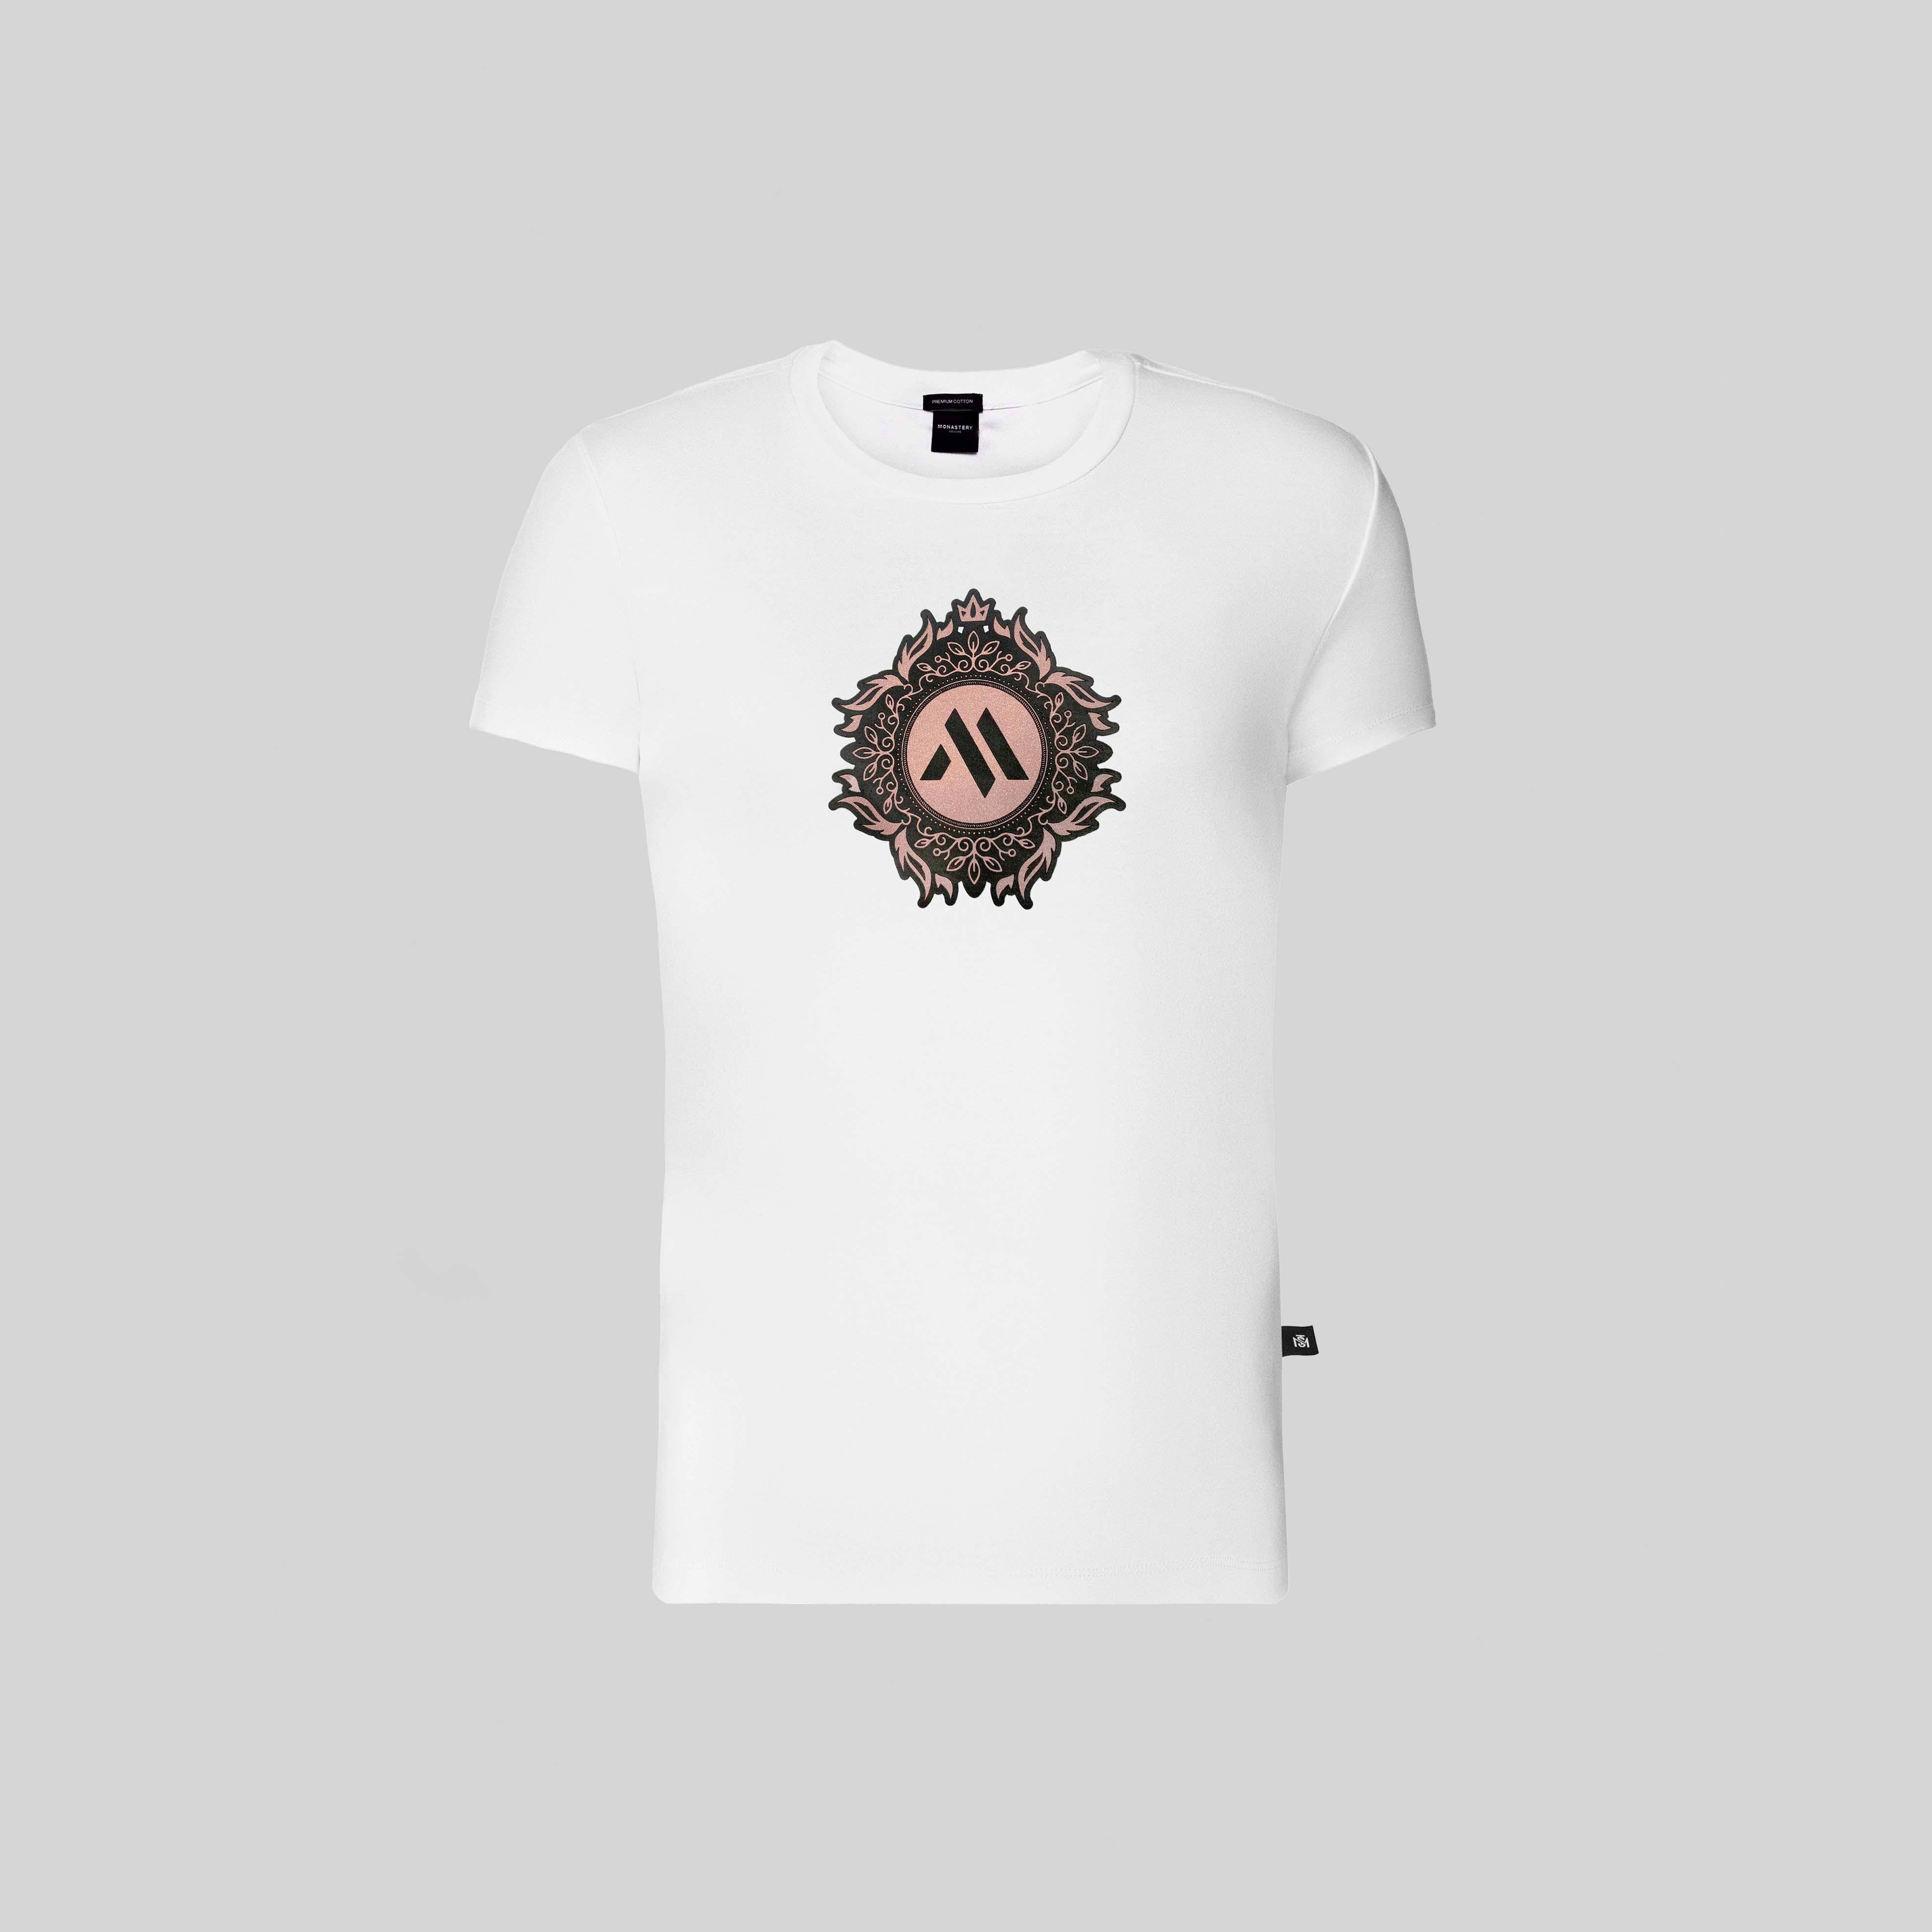 SANT ANGELO T-SHIRT WHITE | Monastery Couture